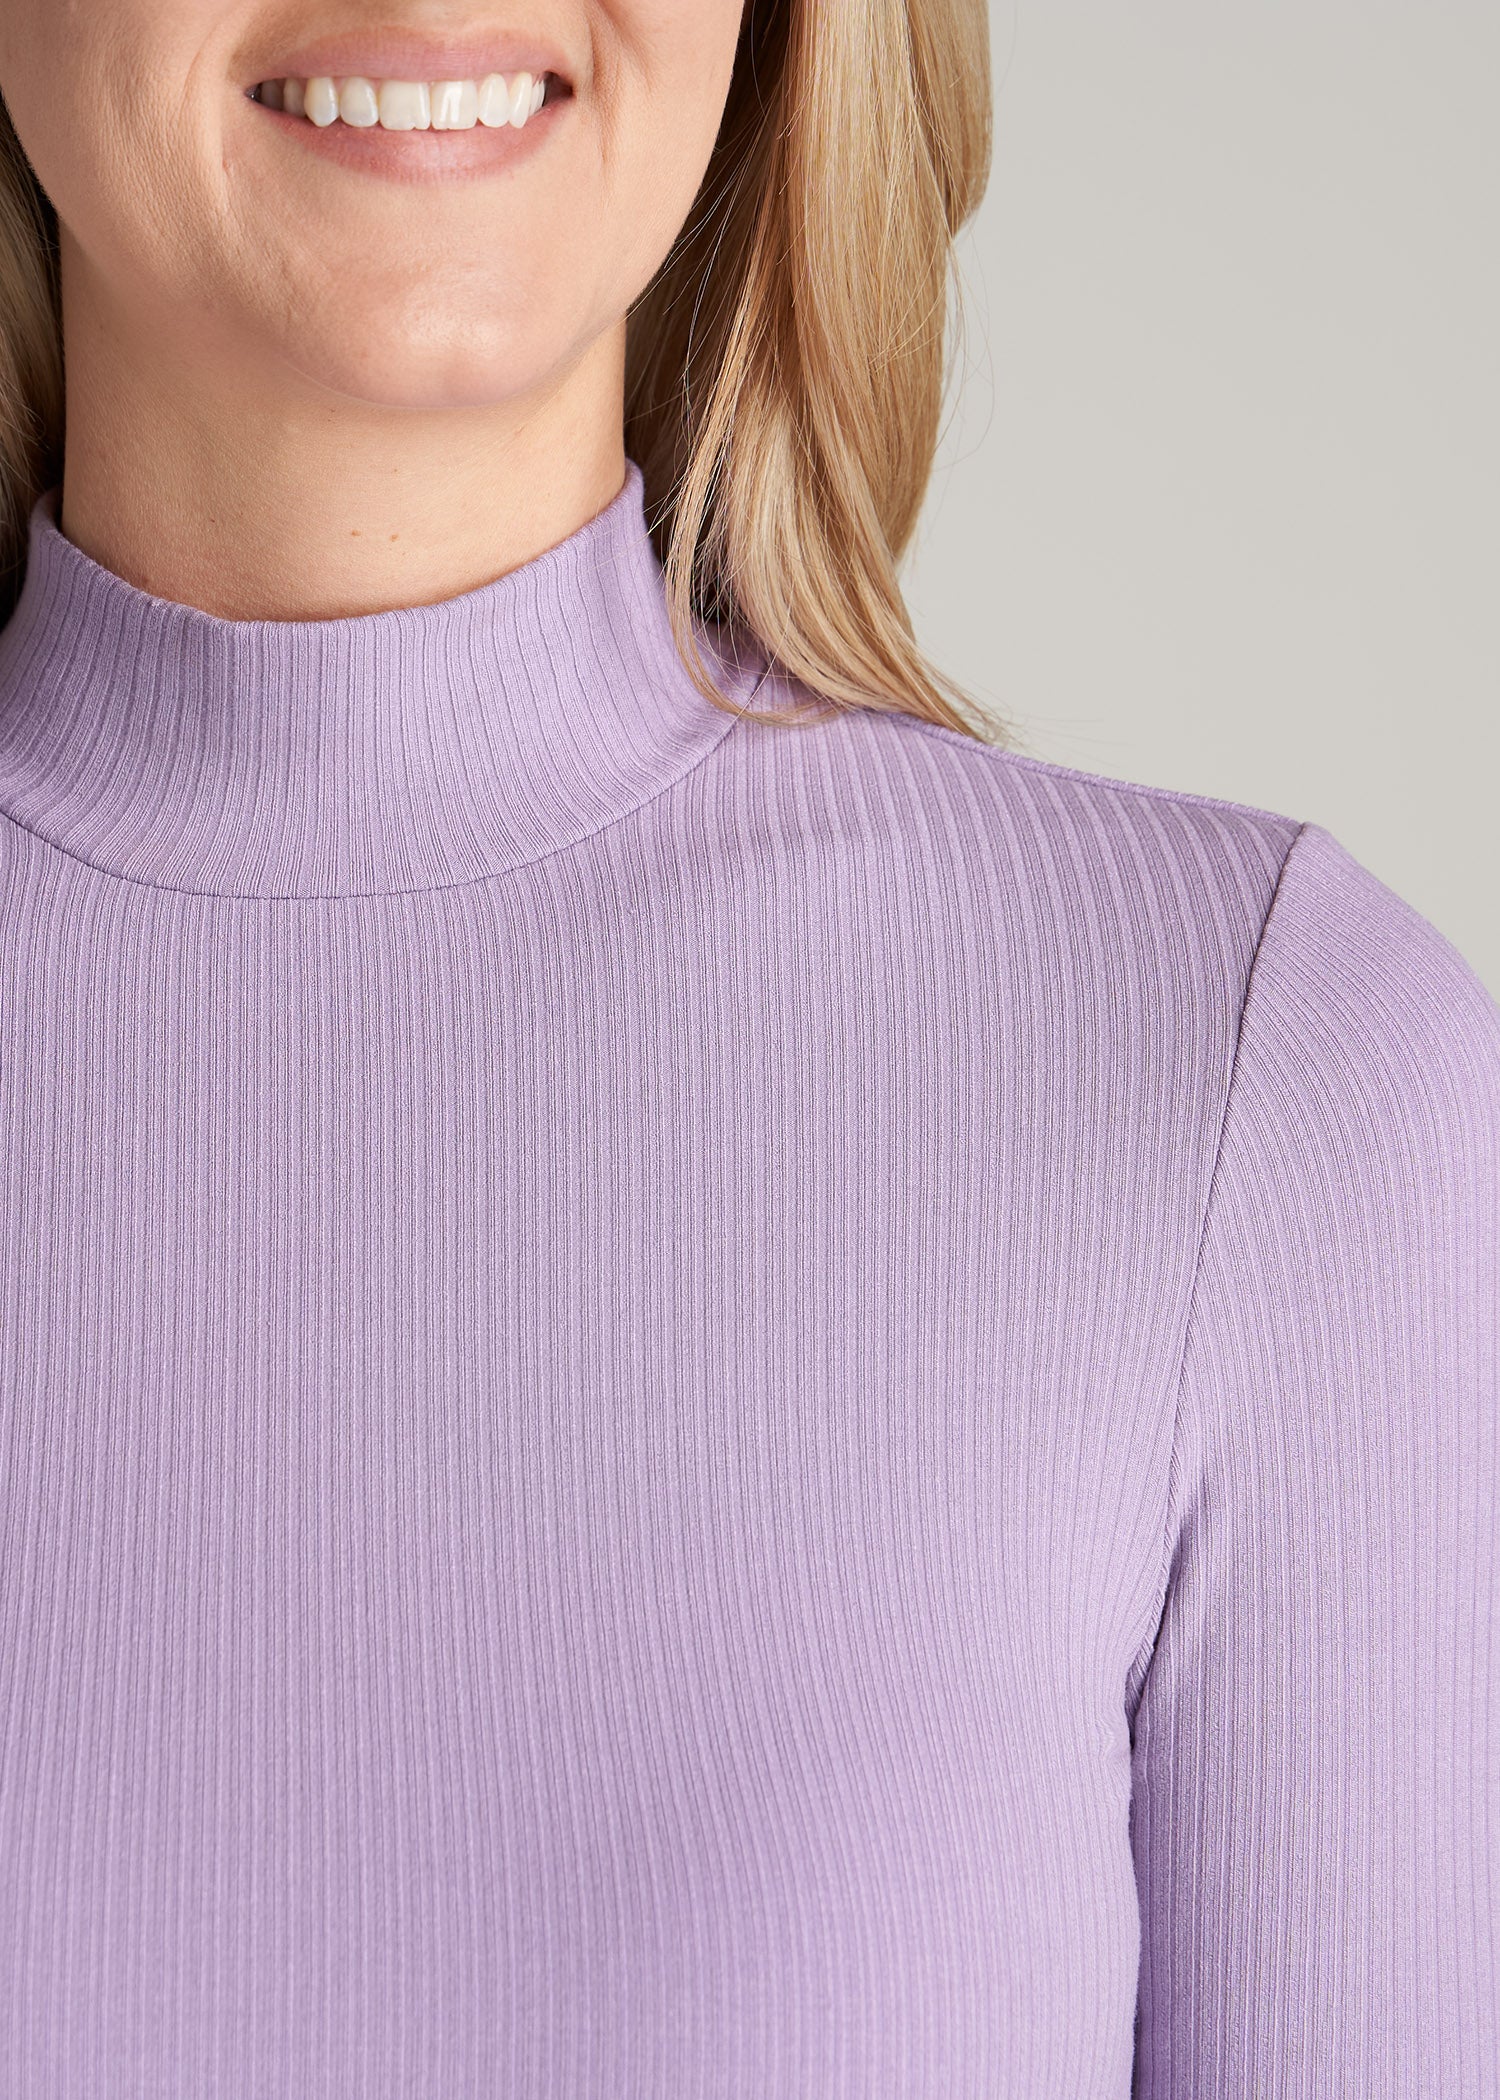 High Neck Lilac Crinkle Top With Long Sleeve & Thumbholes / Ultra Body  Hugging 